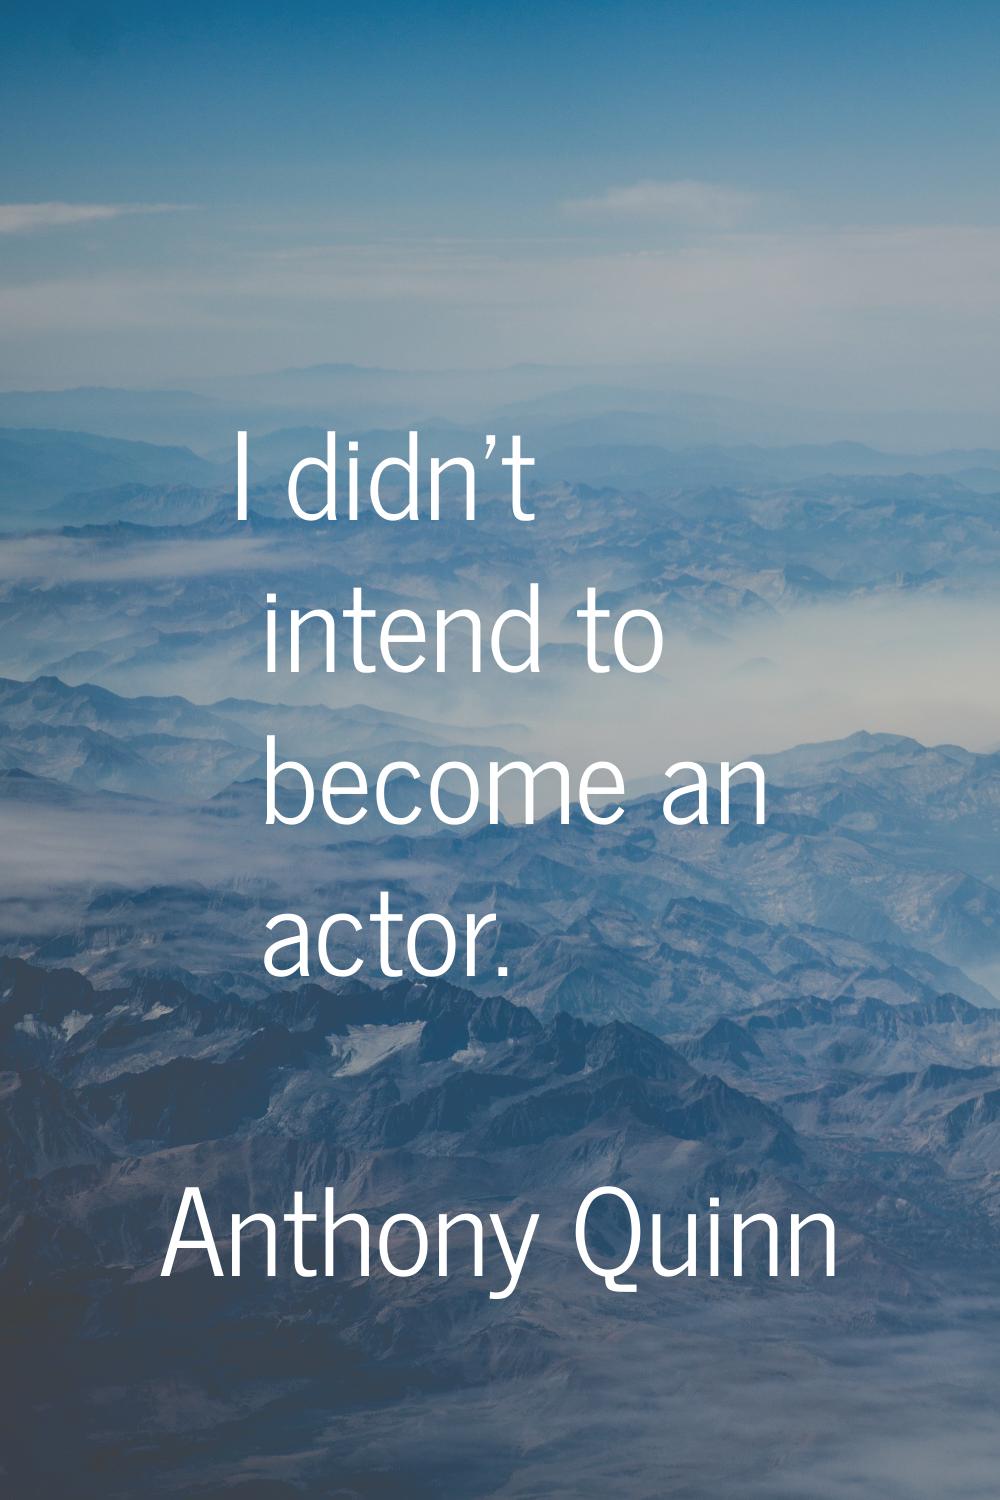 I didn't intend to become an actor.